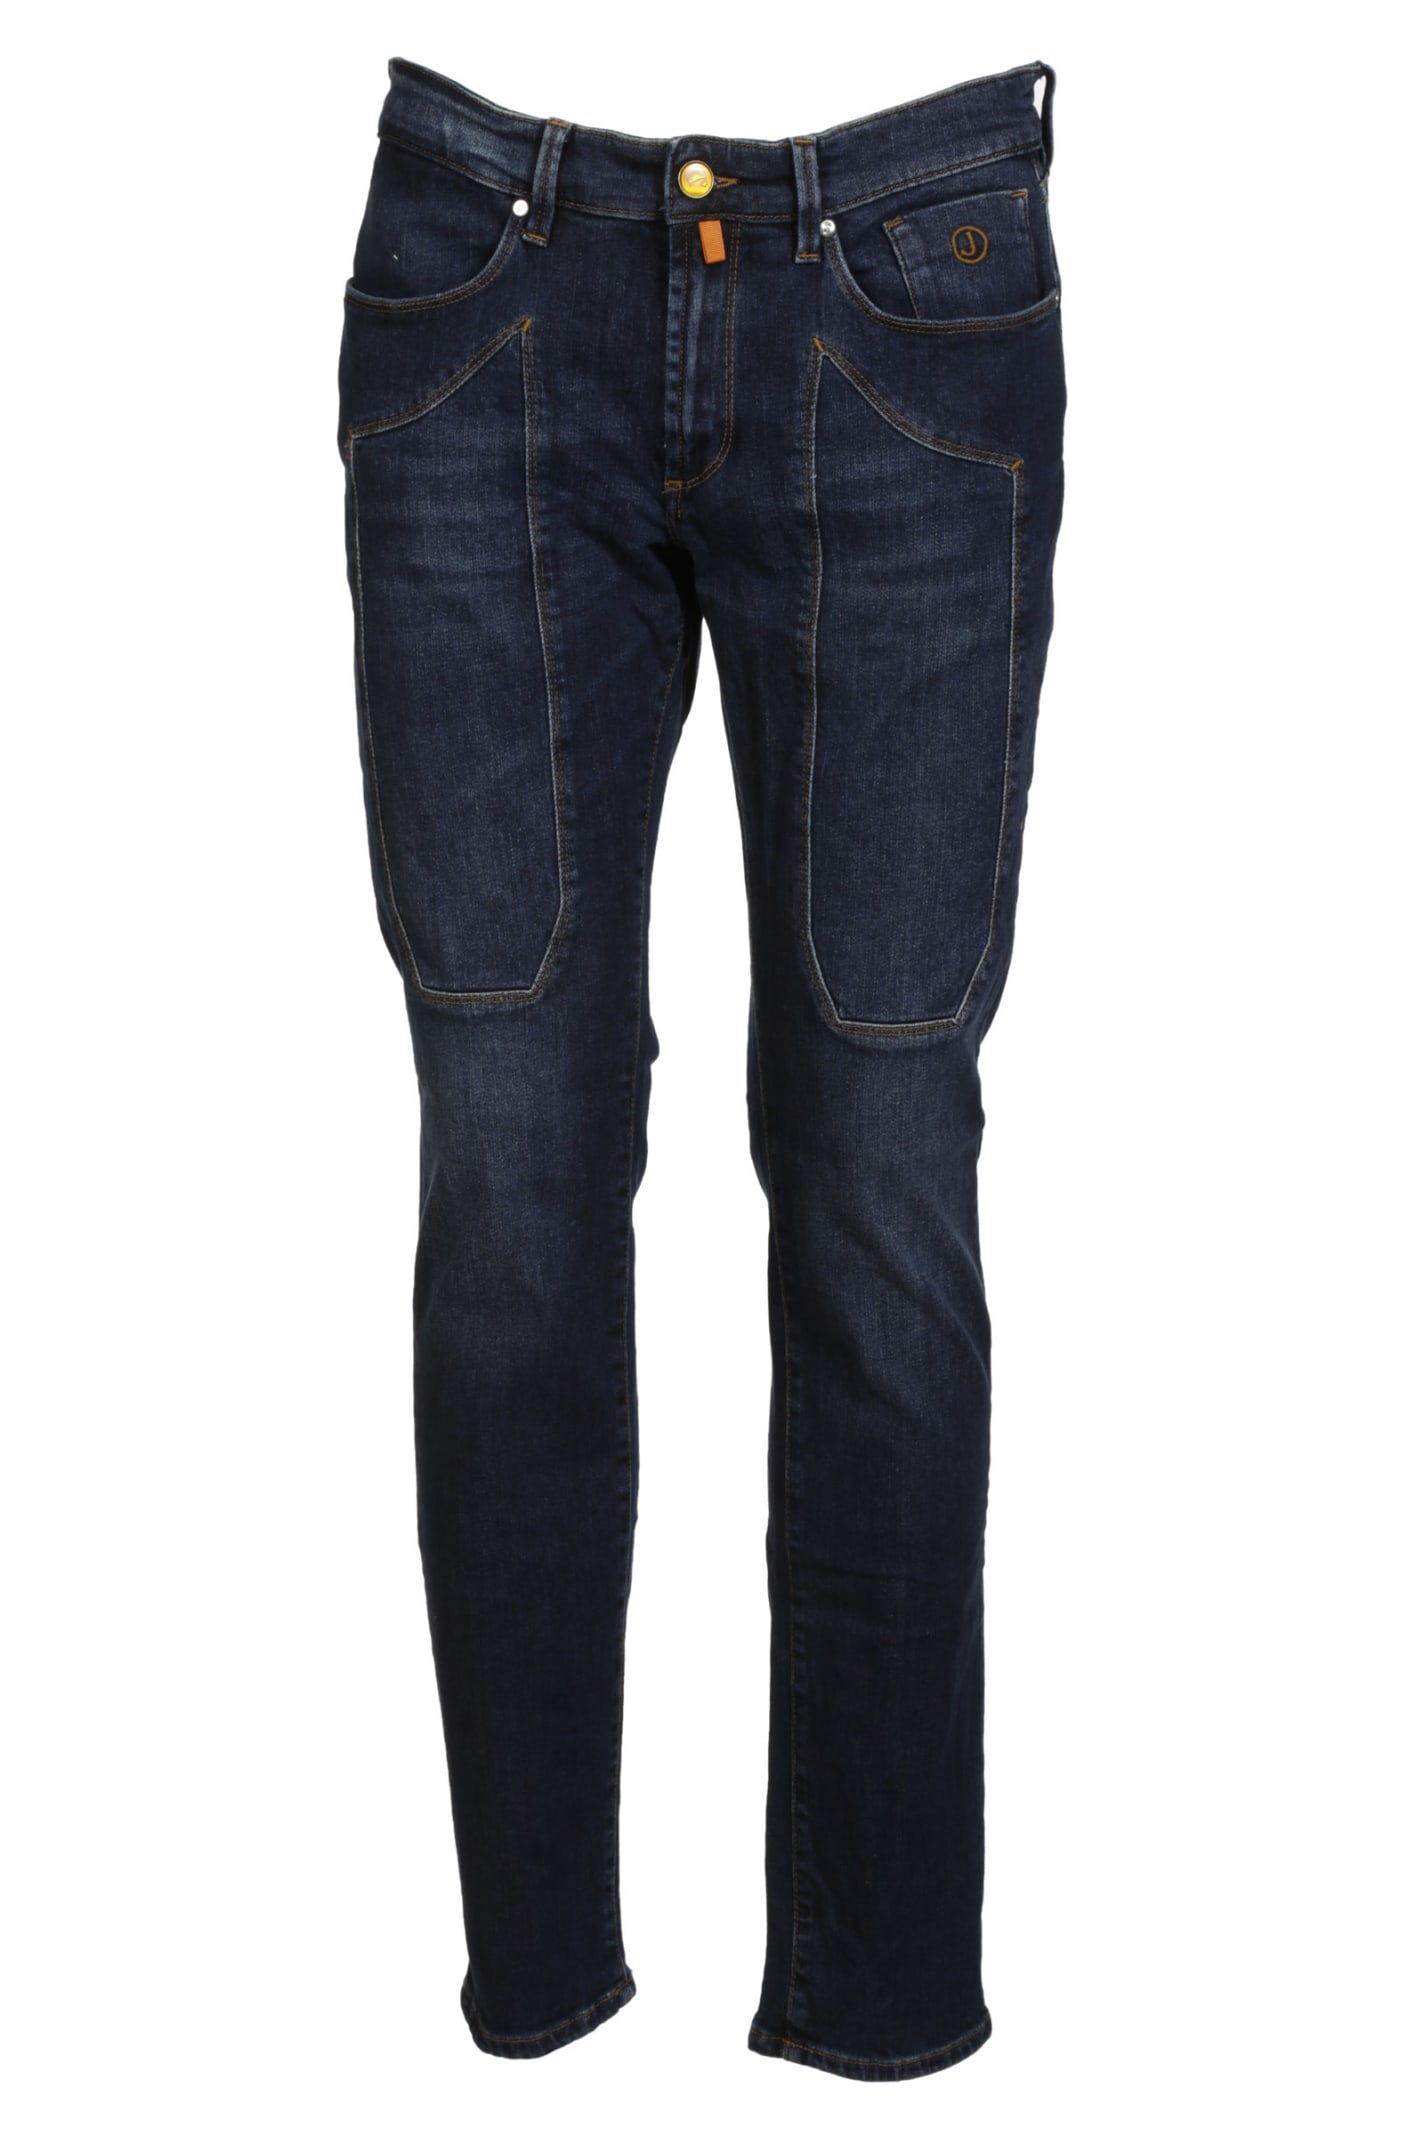 Jeckerson Logo Patched 5 Pockets Jeans